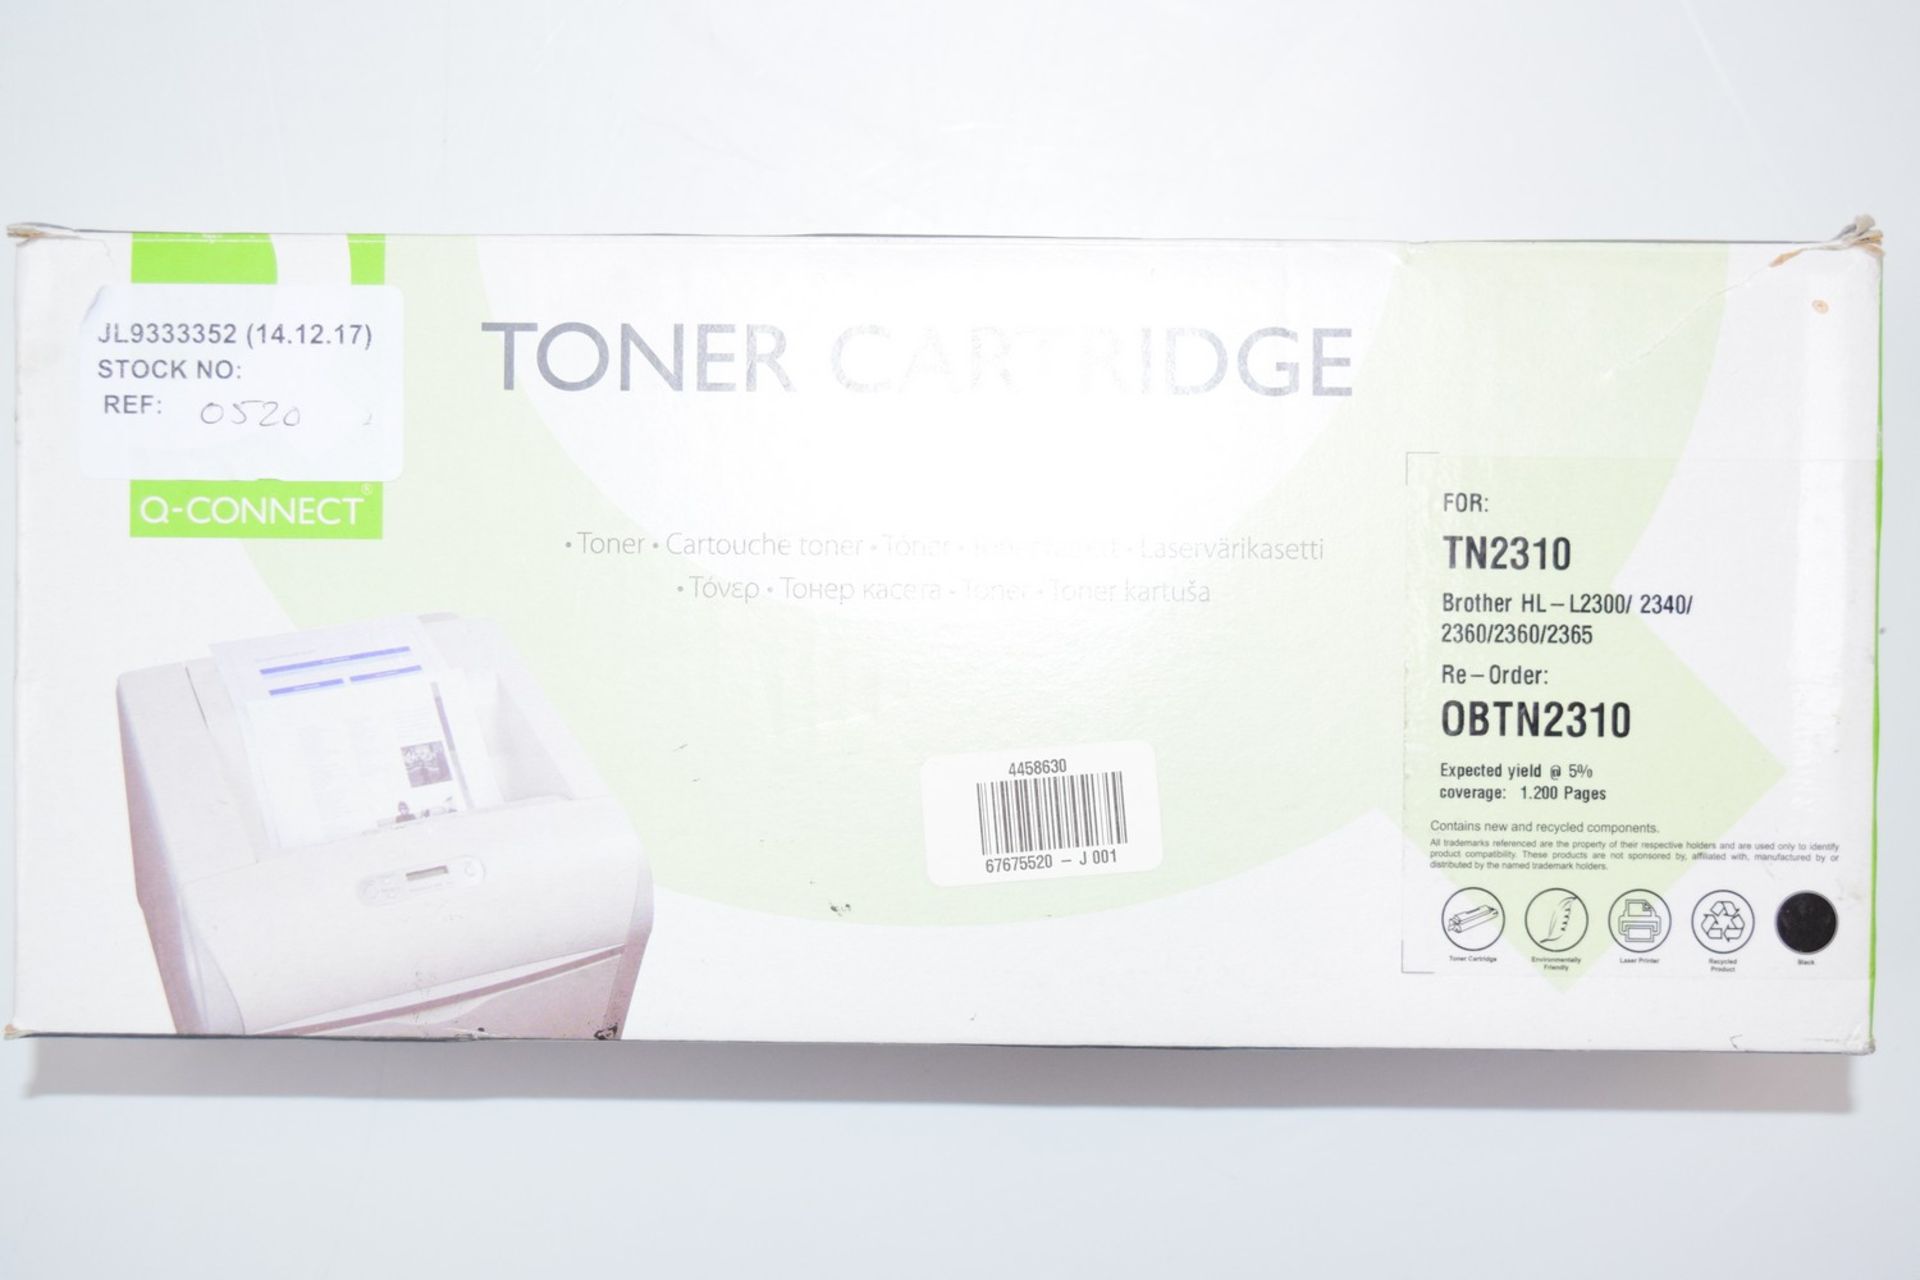 1 x BOXED TONER CARTRIDGE TNT310 RRP £50 14.12.17 4458630 *PLEASE NOTE THAT THE BID PRICE IS